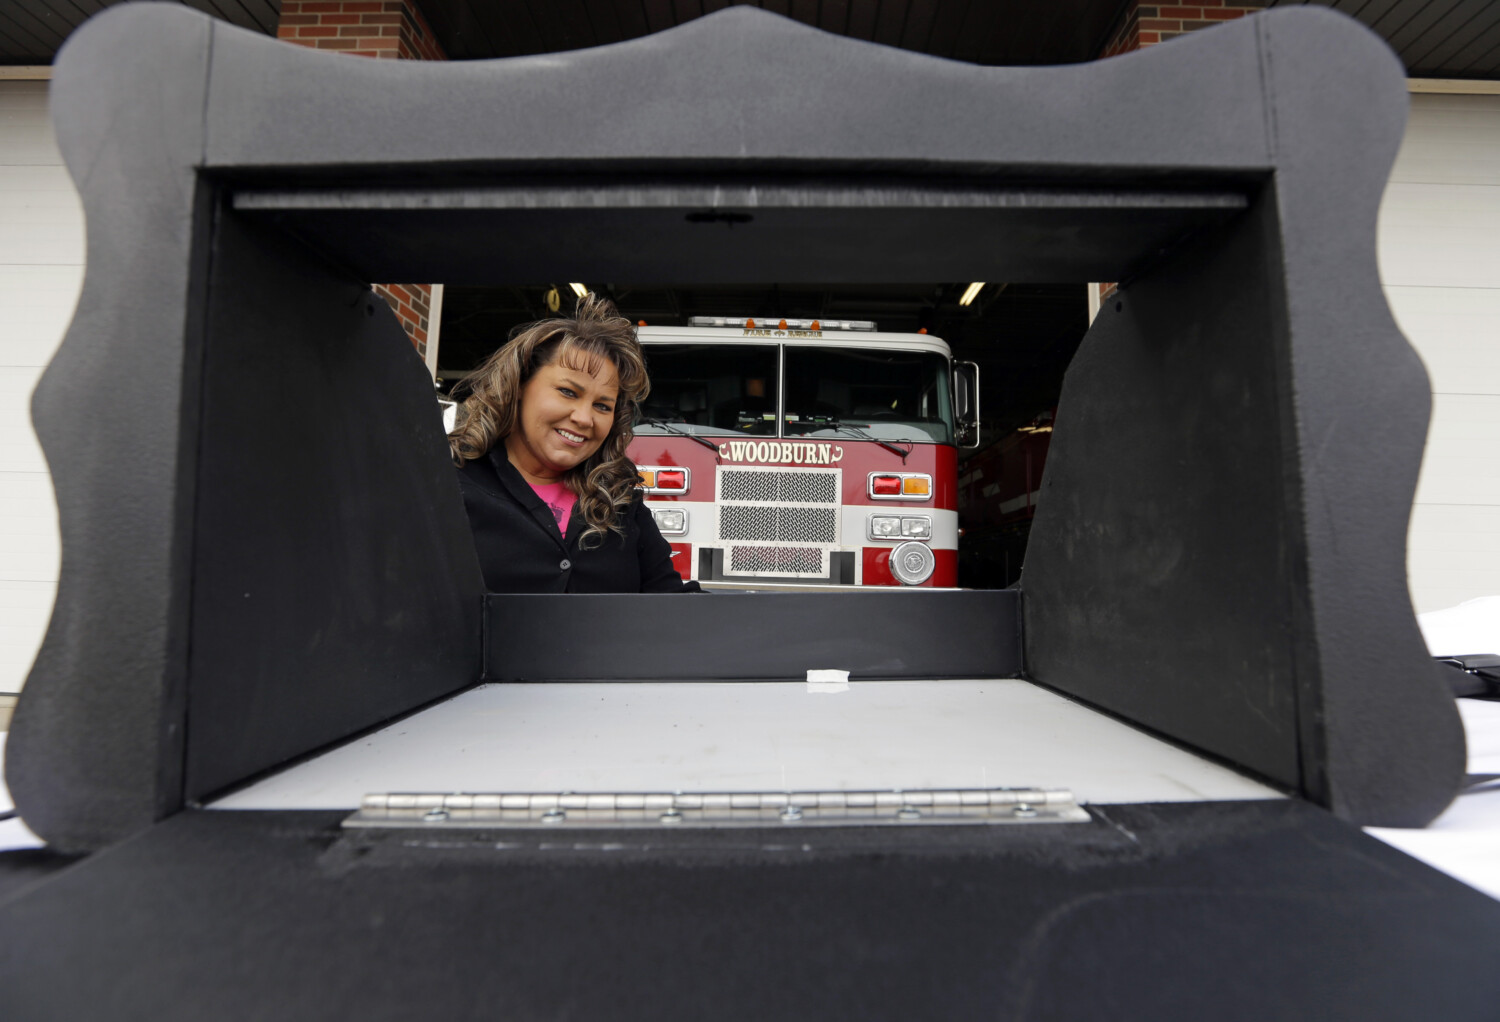 Monica Kelsey, firefighter and medic who is president of Safe Haven Baby Boxes Inc., poses with a prototype of a baby box, where parents could surrender their newborns anonymously, outside her fire station in Woodburn, Ind., Thursday, Feb. 26, 2015. The box is actually a newborn incubator, or baby box, and it could be showing up soon at Indiana hospitals, fire stations, churches and other selected sites under legislation that would give mothers in crisis a way to surrender their children safely and anonymously. (AP Photo/Michael Conroy)